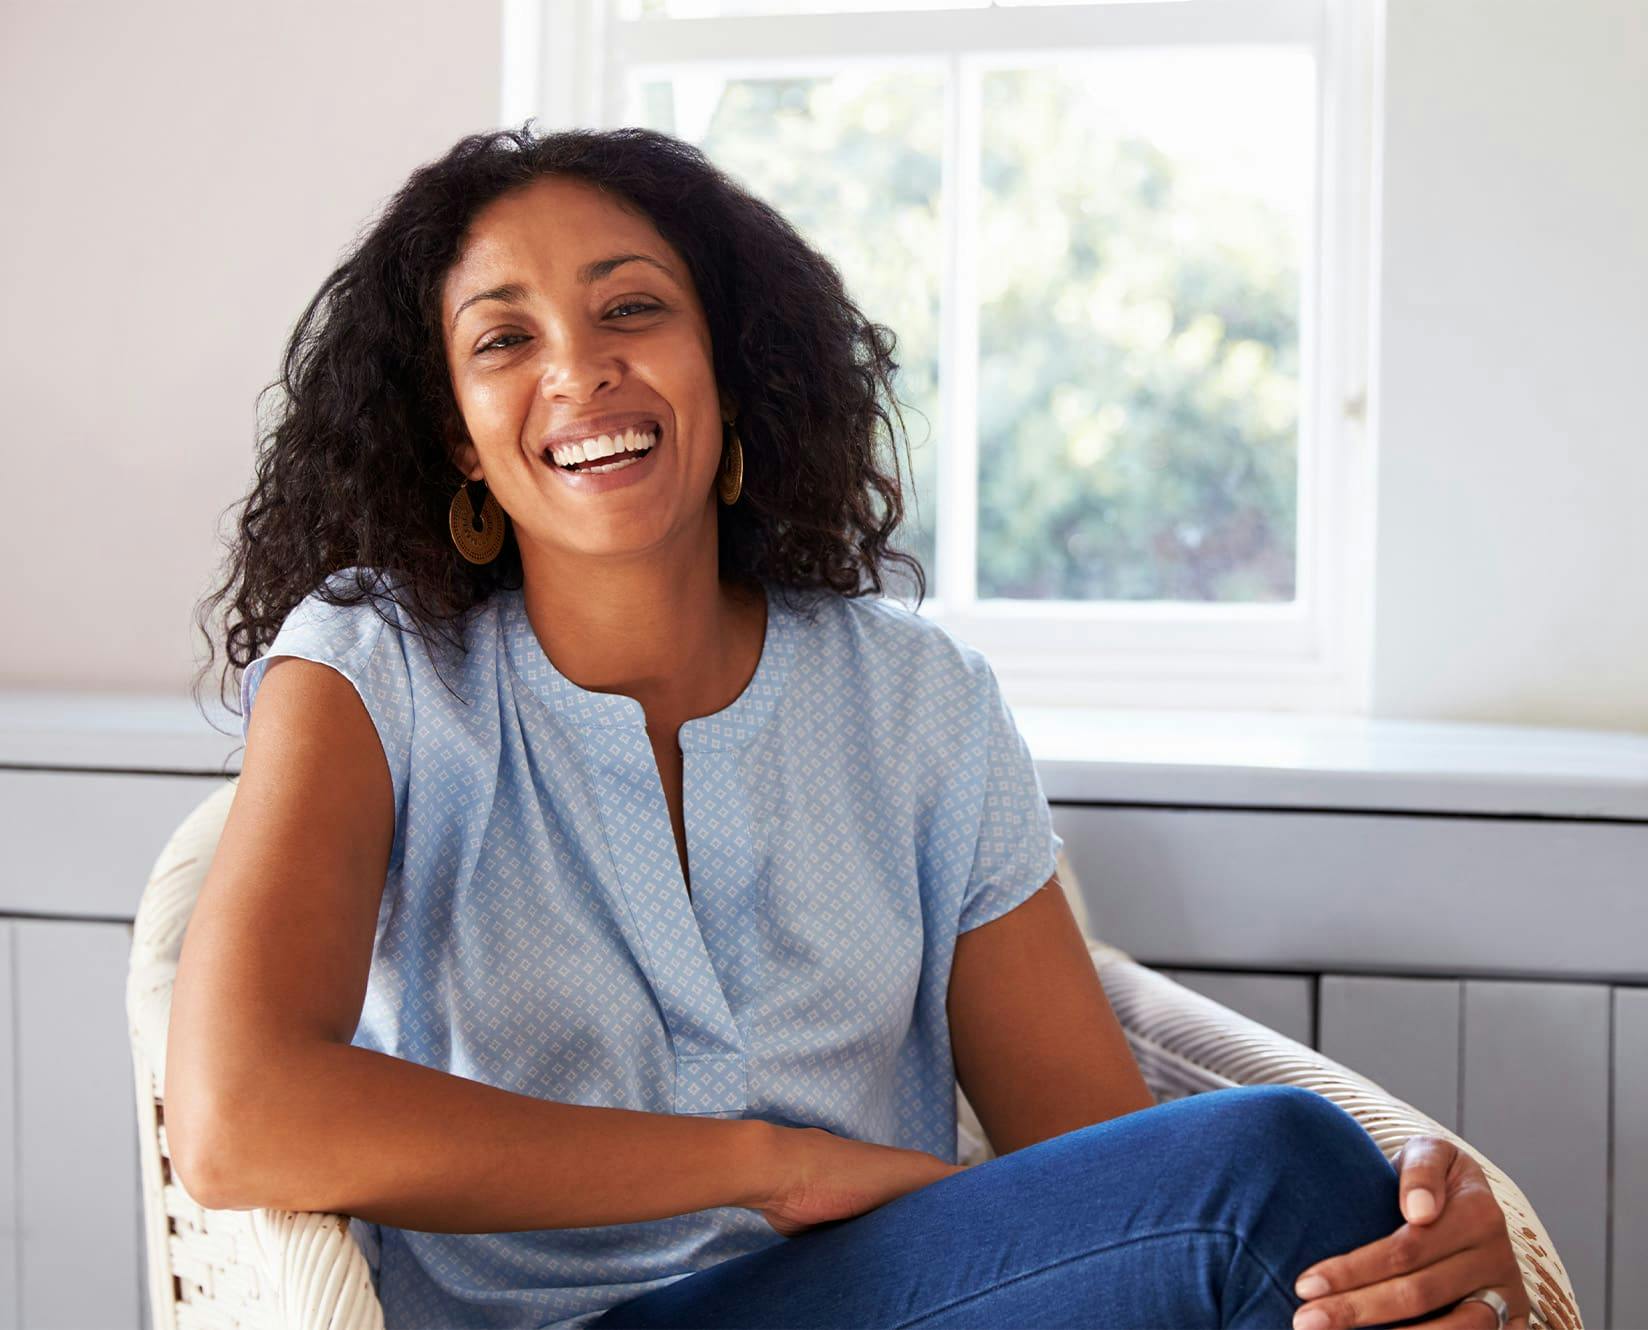 woman in a blue blouse sitting down and smiling